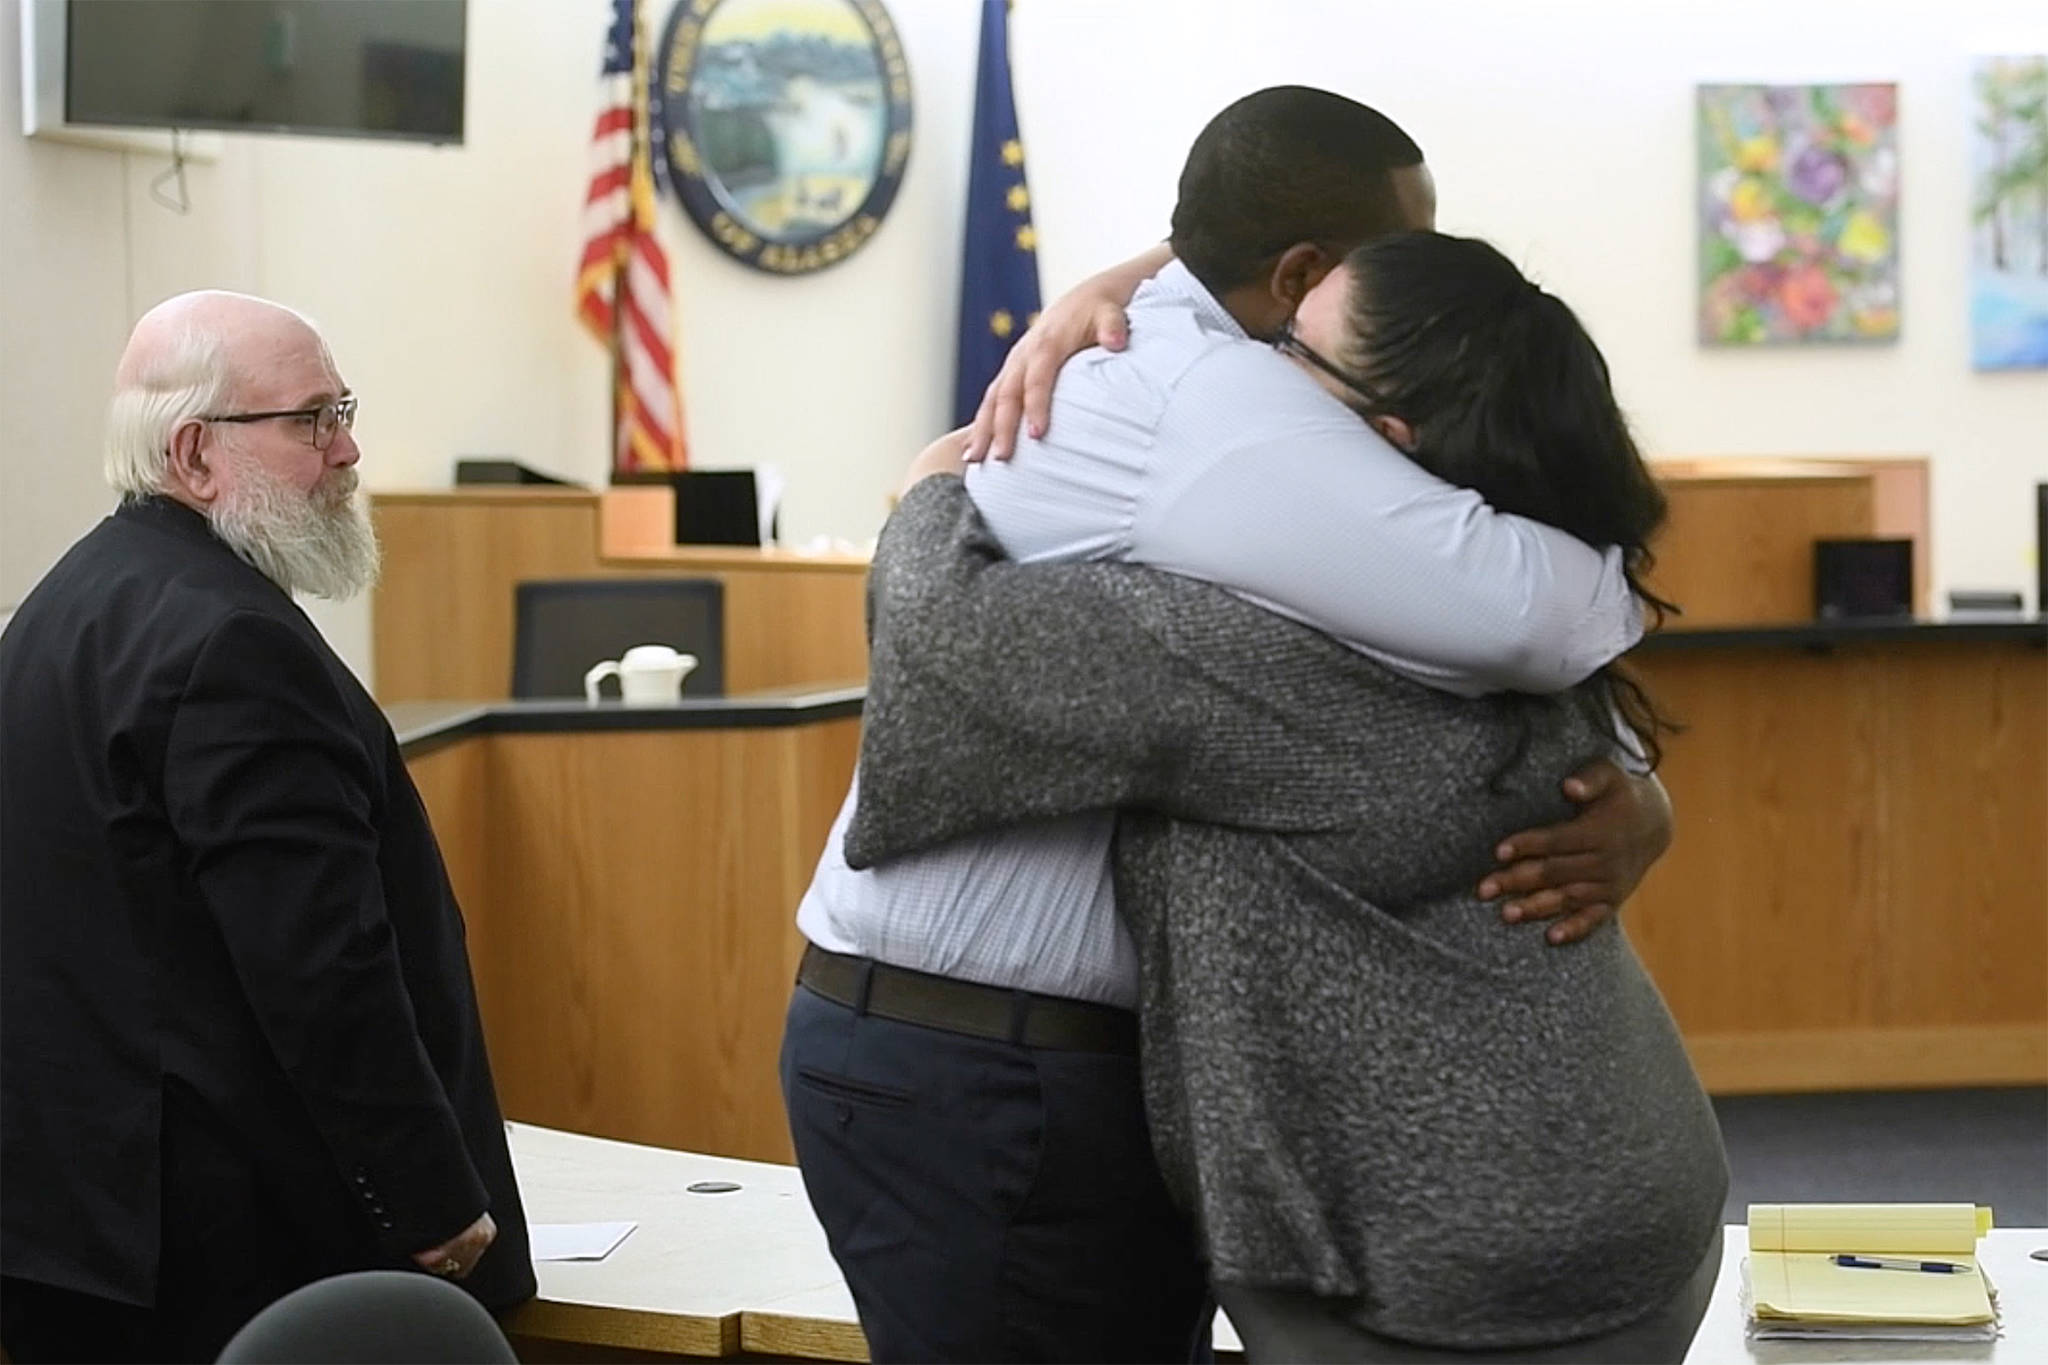 Laron Carlton Graham hugs his defense attorney Natasha Norris after a jury found him not guilty for the November 2015 shooting deaths of 36-year-old Robert H. Meireis and 34-year-old Elizabeth K. Tonsmeire in Juneau Superior Court on Tuesday, Oct. 8, 2019. (Michael Penn | Juneau Empire)